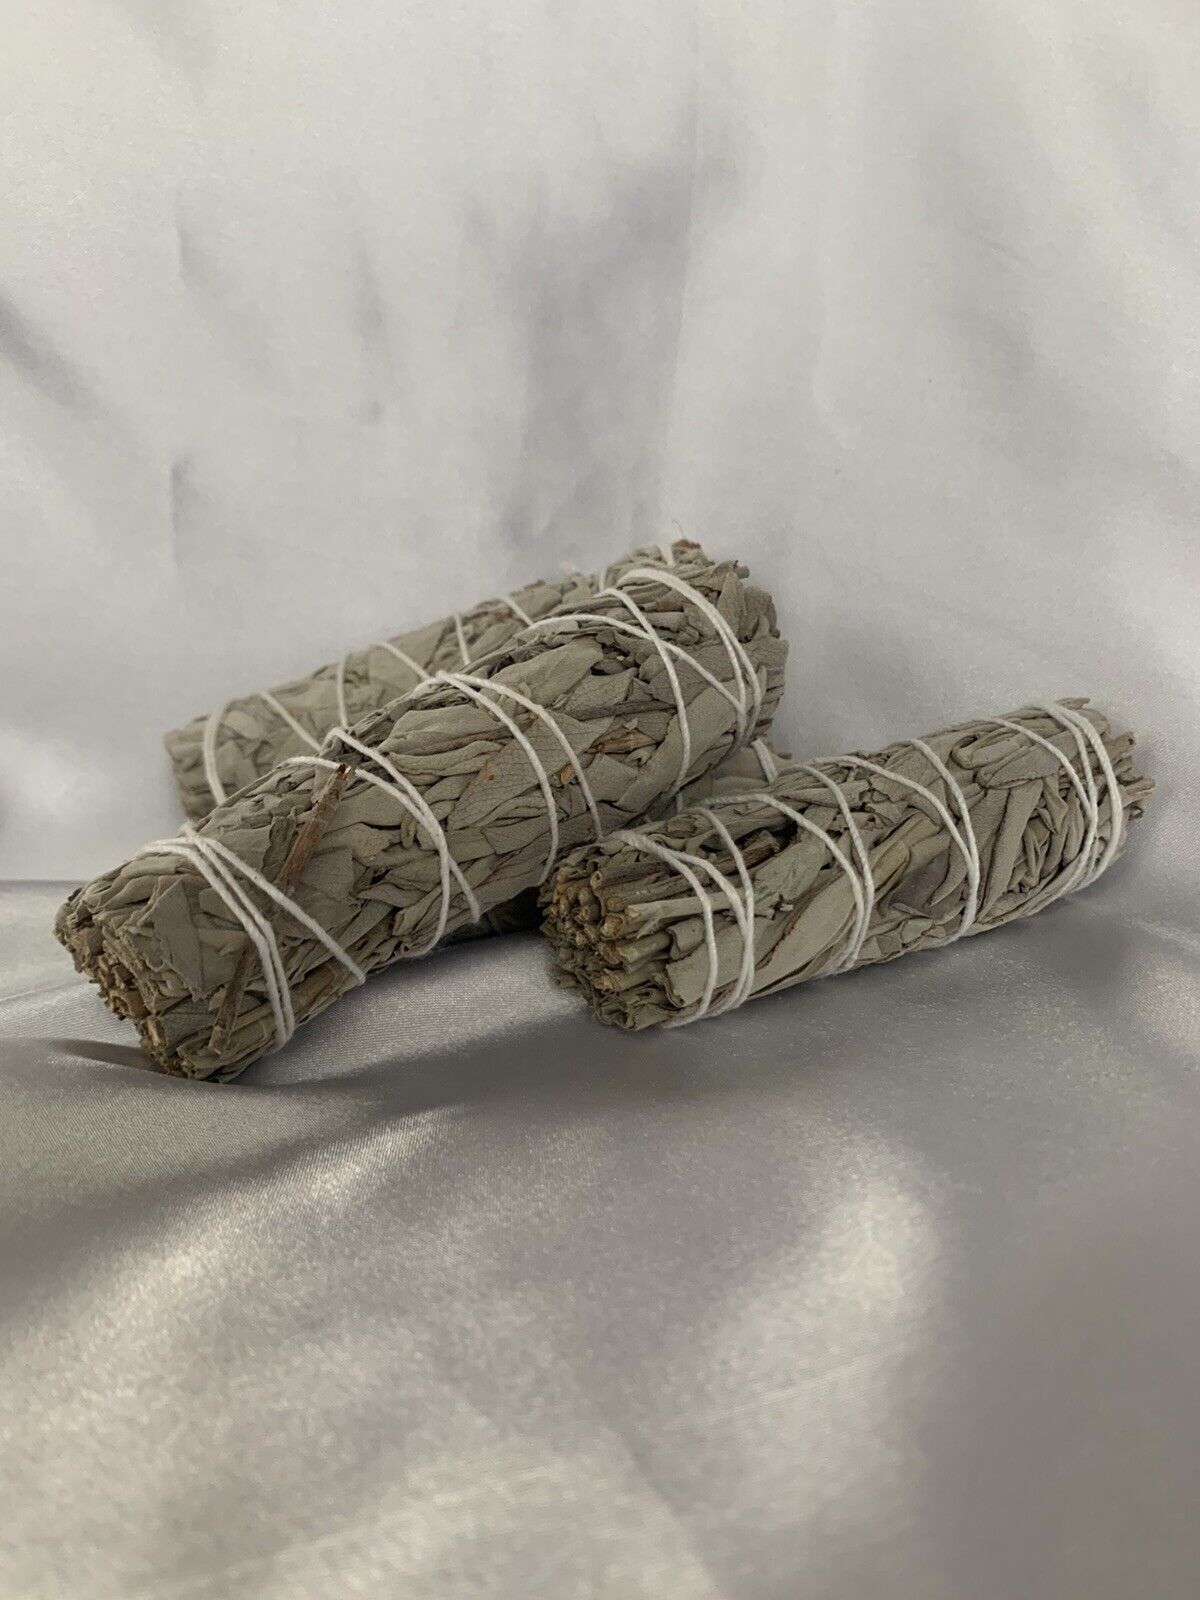 3 Piece - 4 inch Premium White Sage Smudge Sticksfor Cleansing / Purifying Space